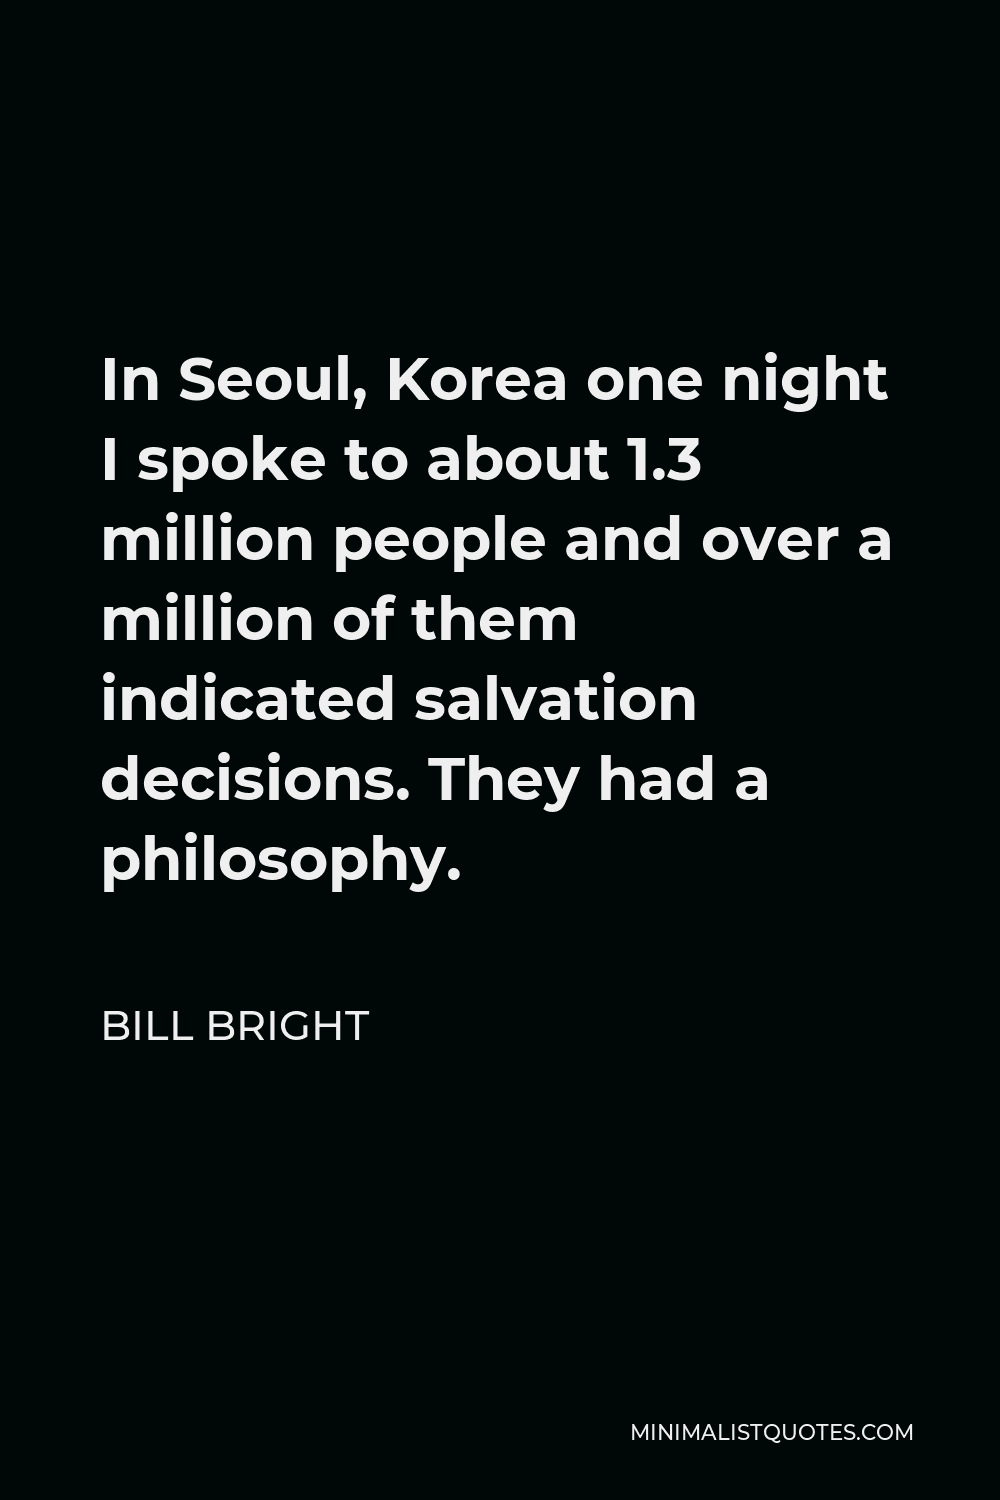 Bill Bright Quote - In Seoul, Korea one night I spoke to about 1.3 million people and over a million of them indicated salvation decisions. They had a philosophy.